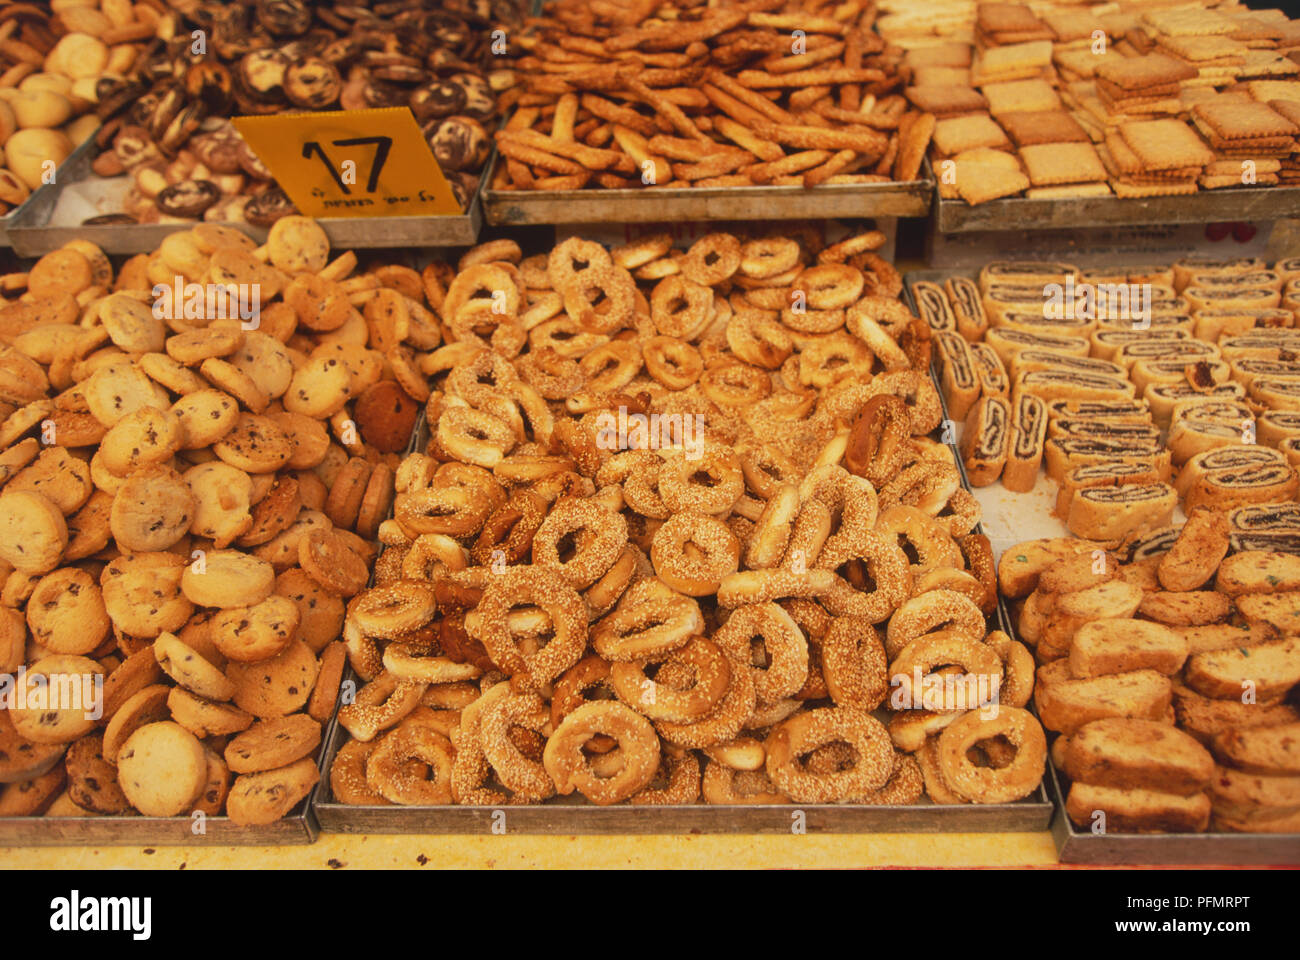 Israel, Israel, Jerusalem, Souk Kahn el-Zeit, trays filled with local pastries, high angle view. Stock Photo